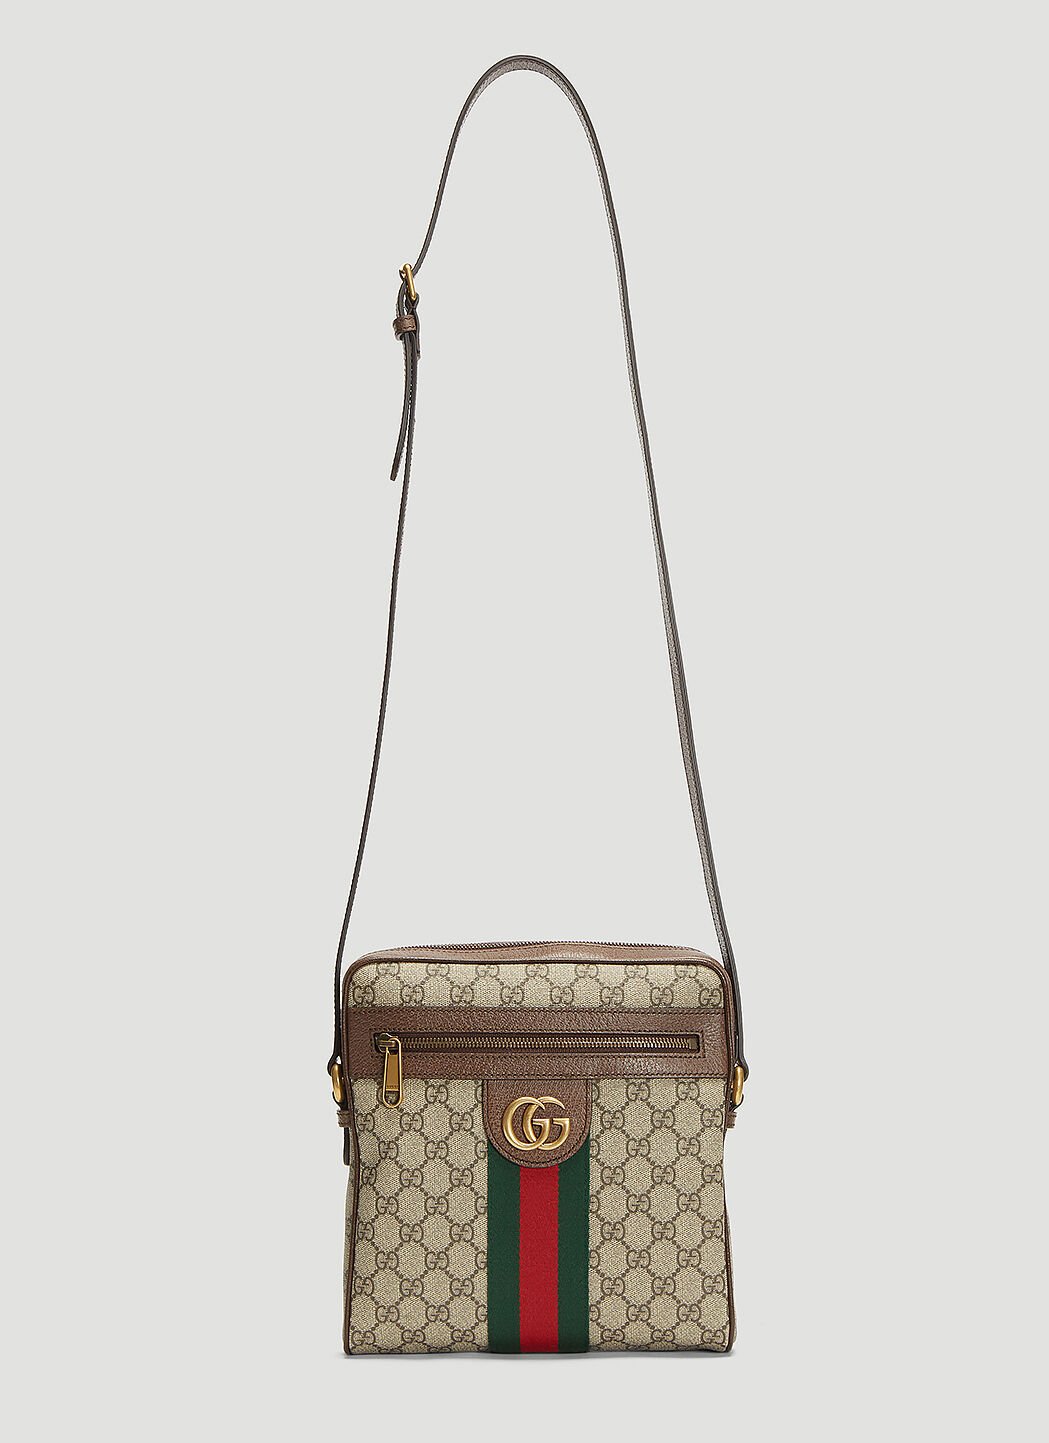 Gucci Small Ophidia Messenger Bag Beige guc0152214